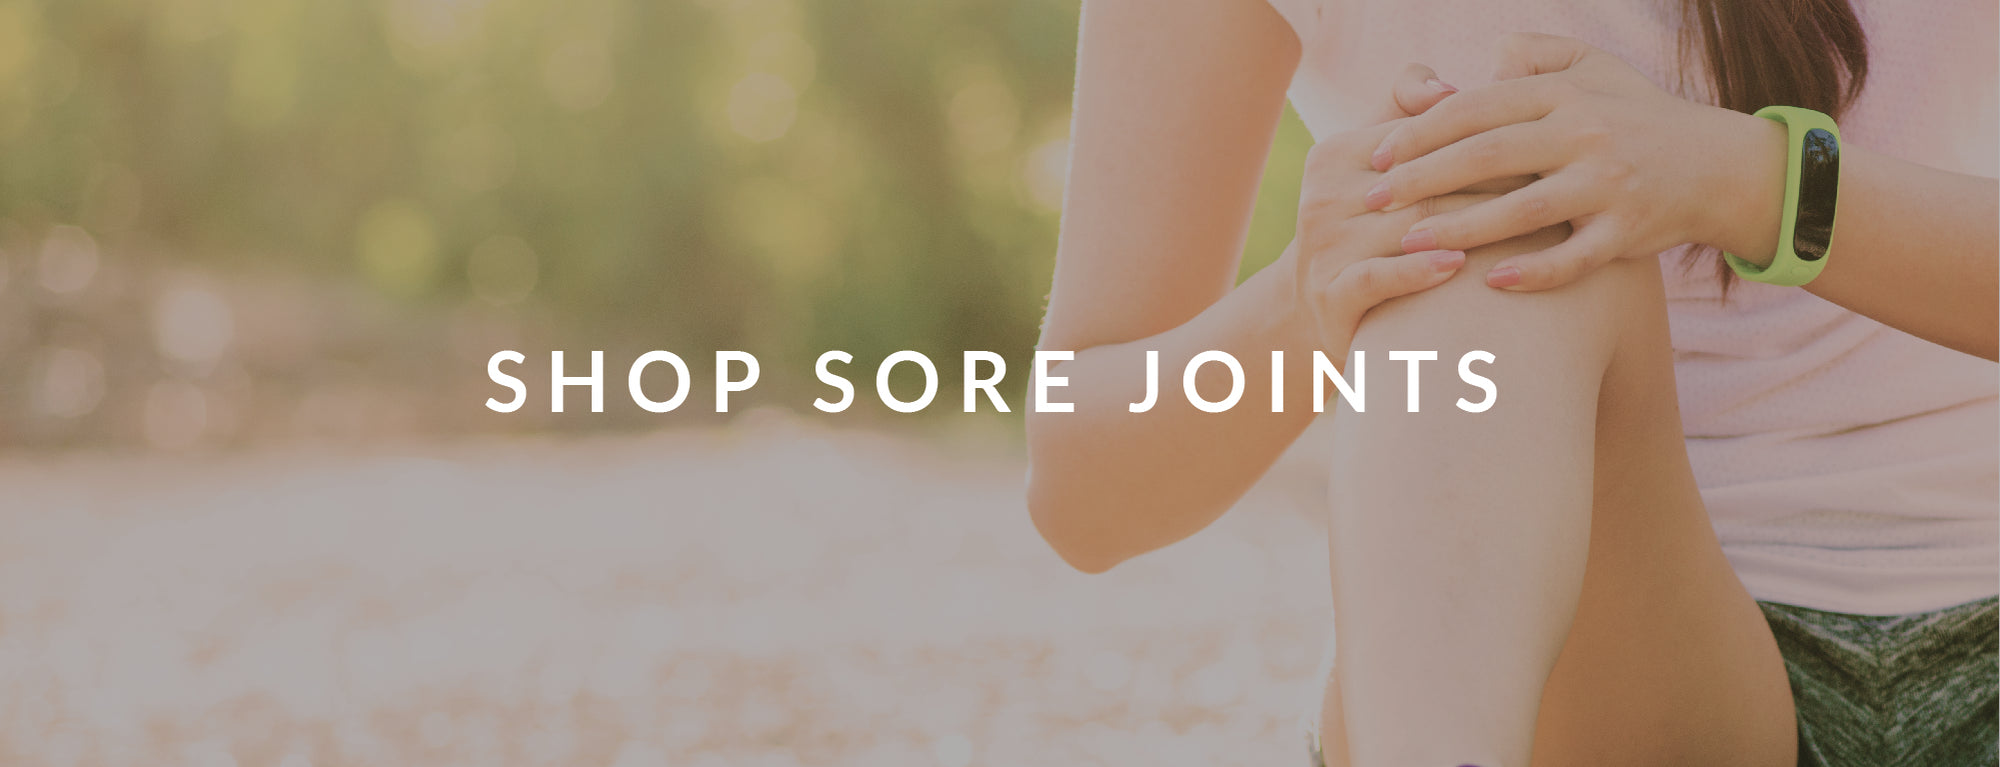 Sore Joints